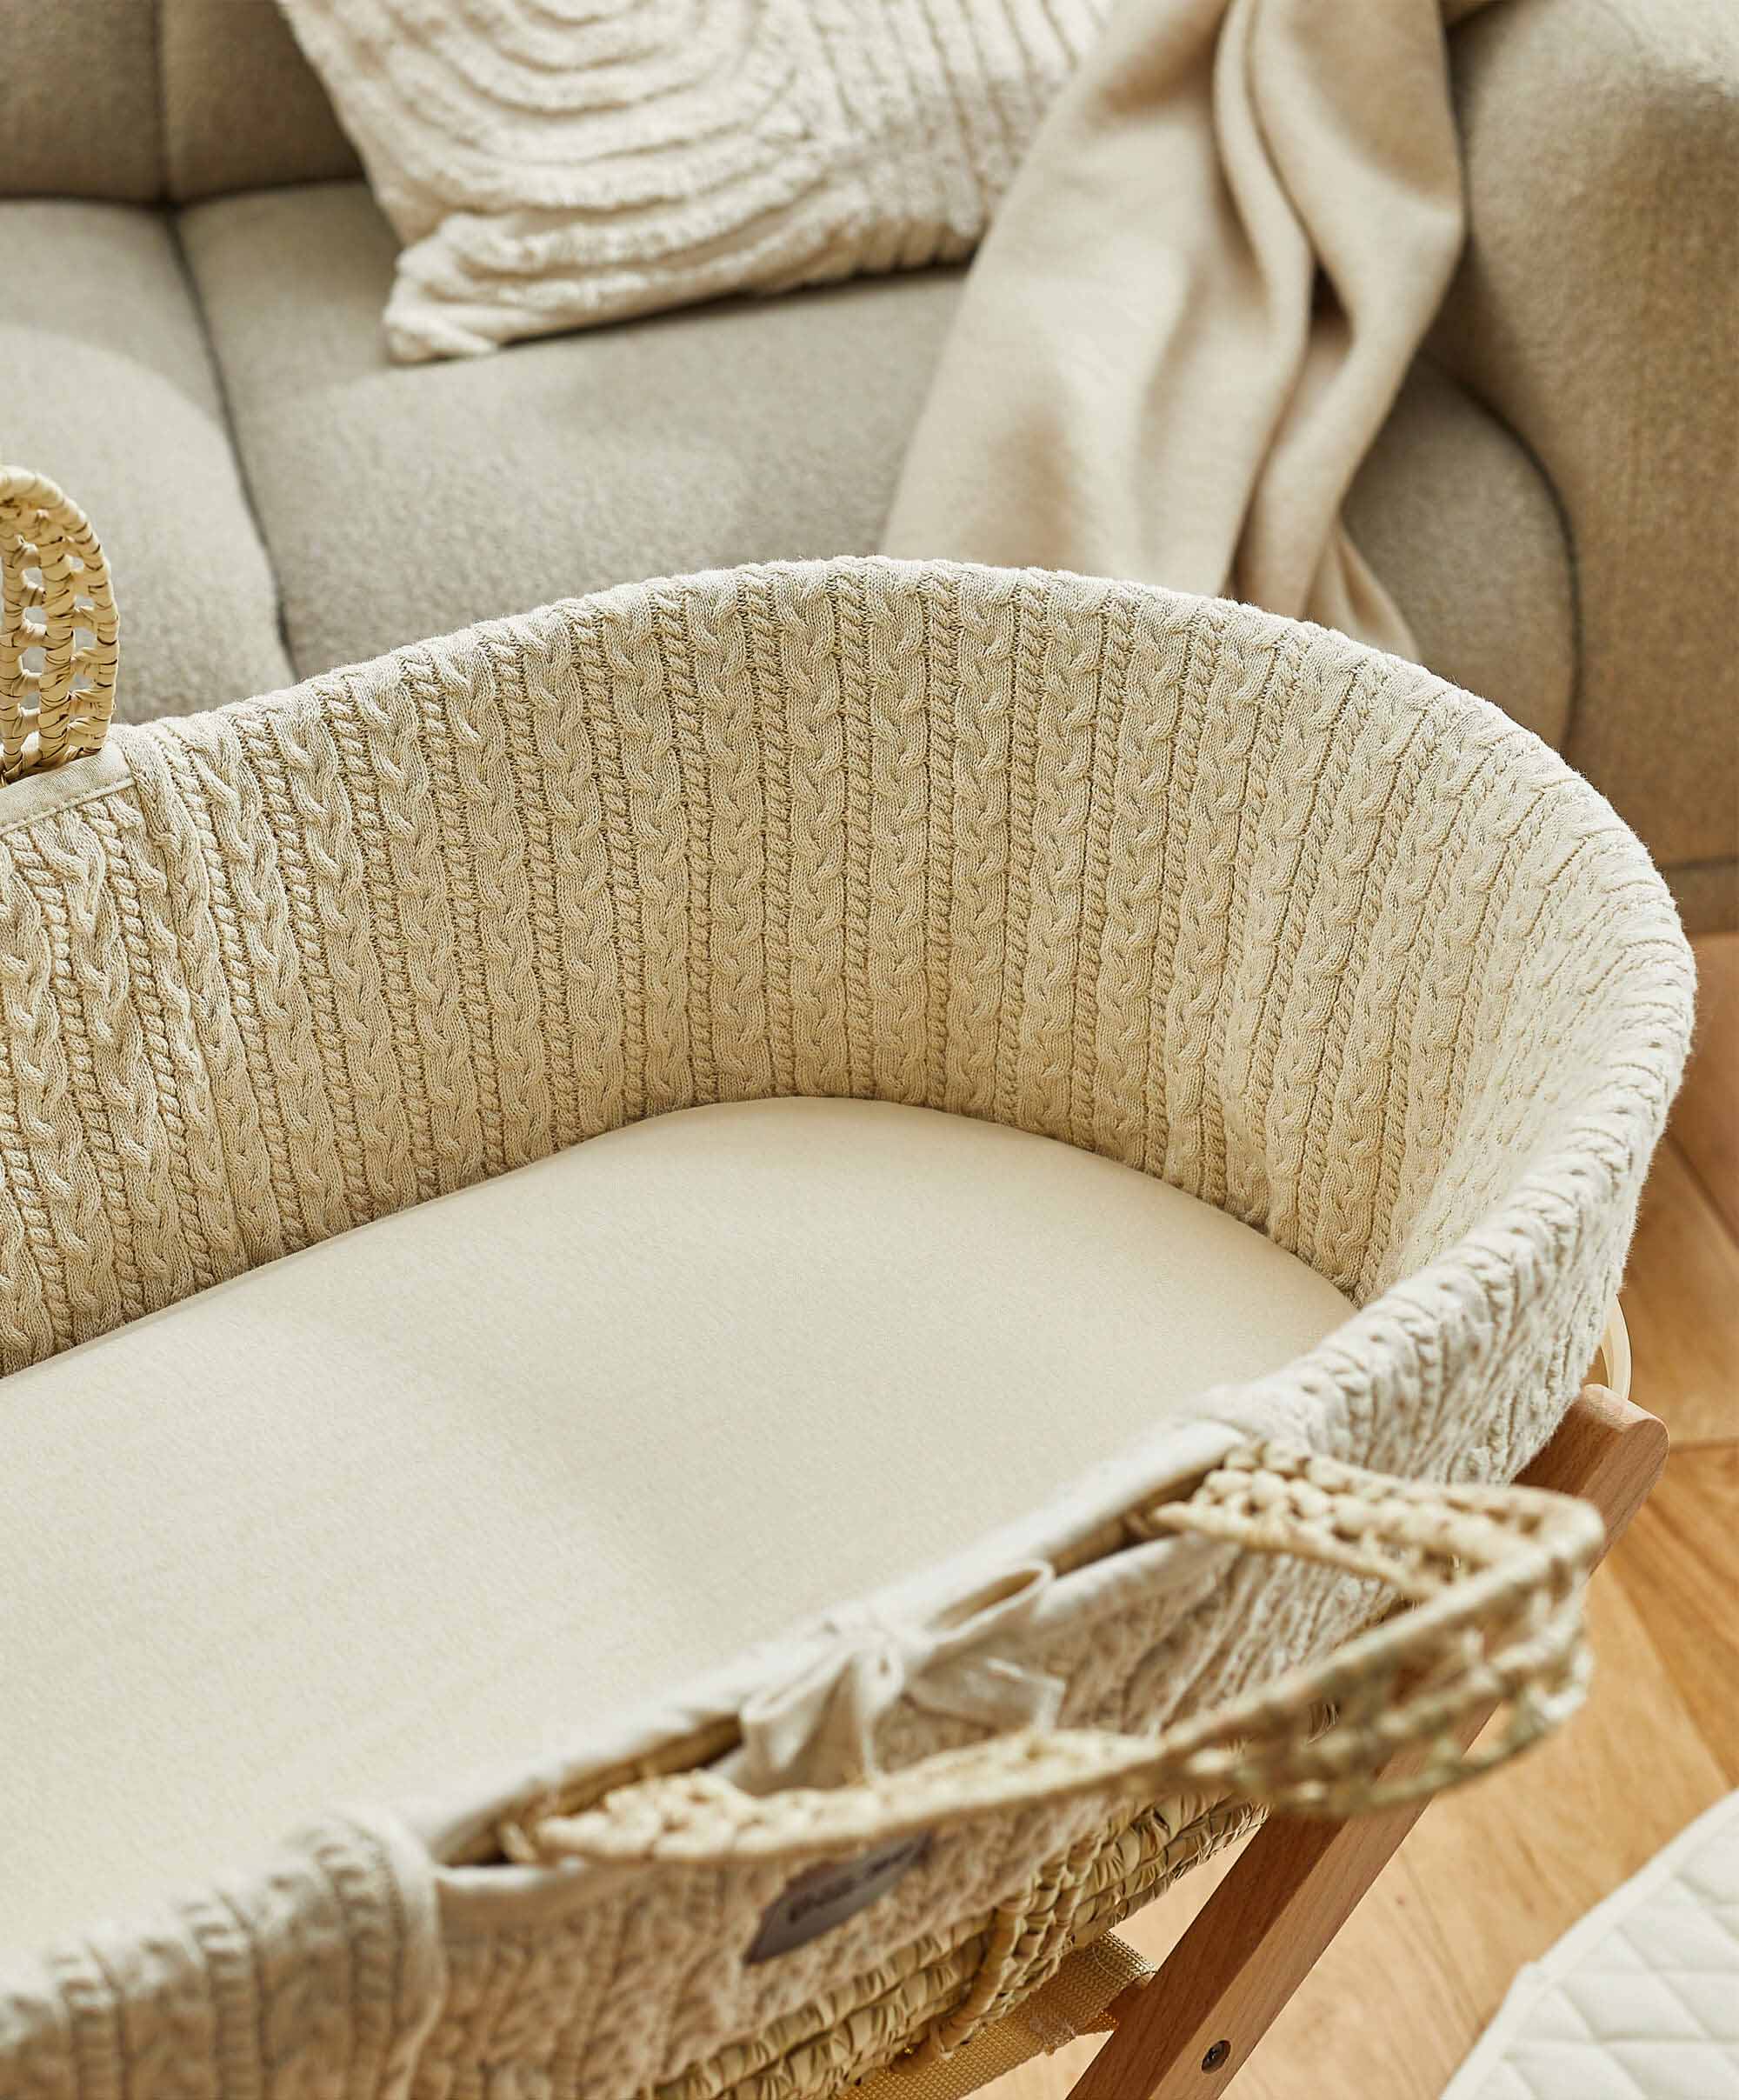 The Little Green Sheep Organic Jersey Moses Basket Fitted Sheet in Linen